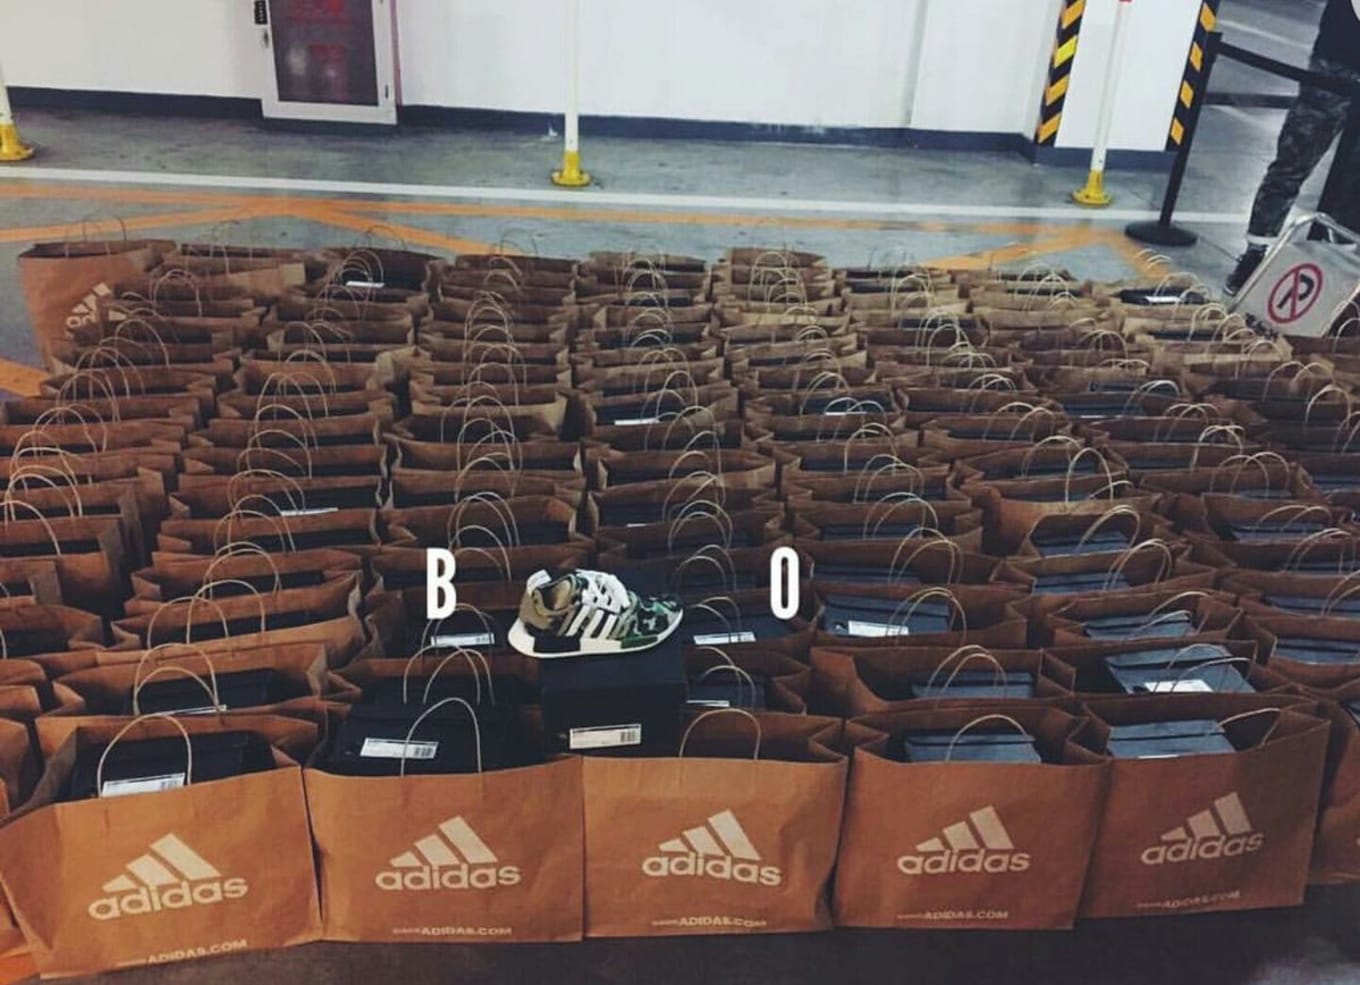 Reseller Scores at x Adidas NMD Release | Sole Collector